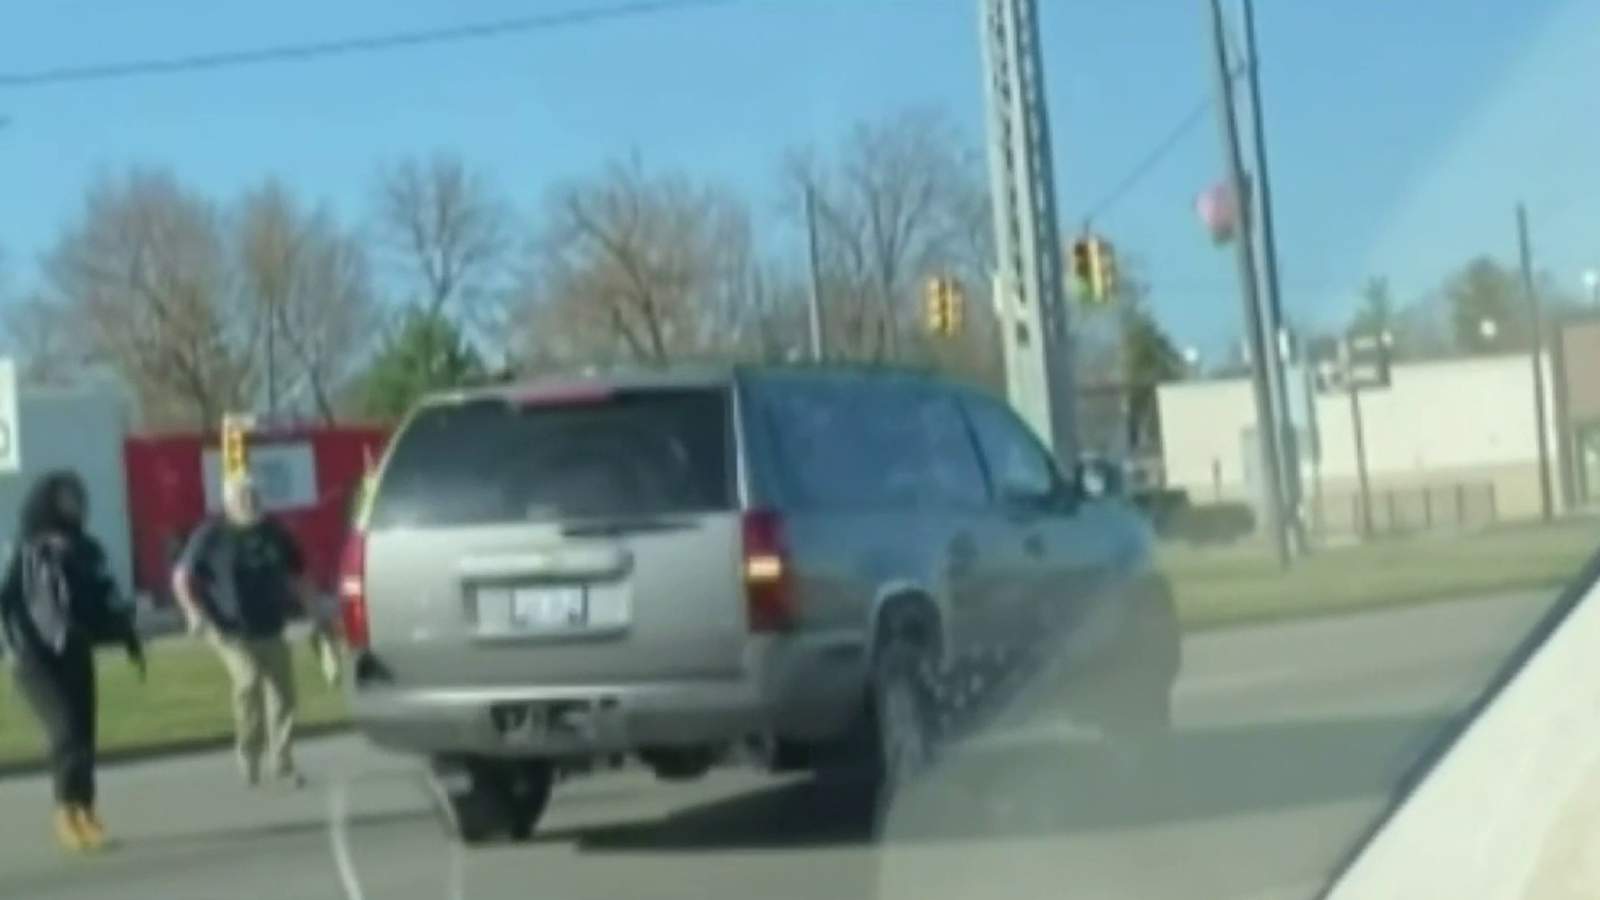 Video shows driverless SUV stuck in reverse on Detroit’s west side